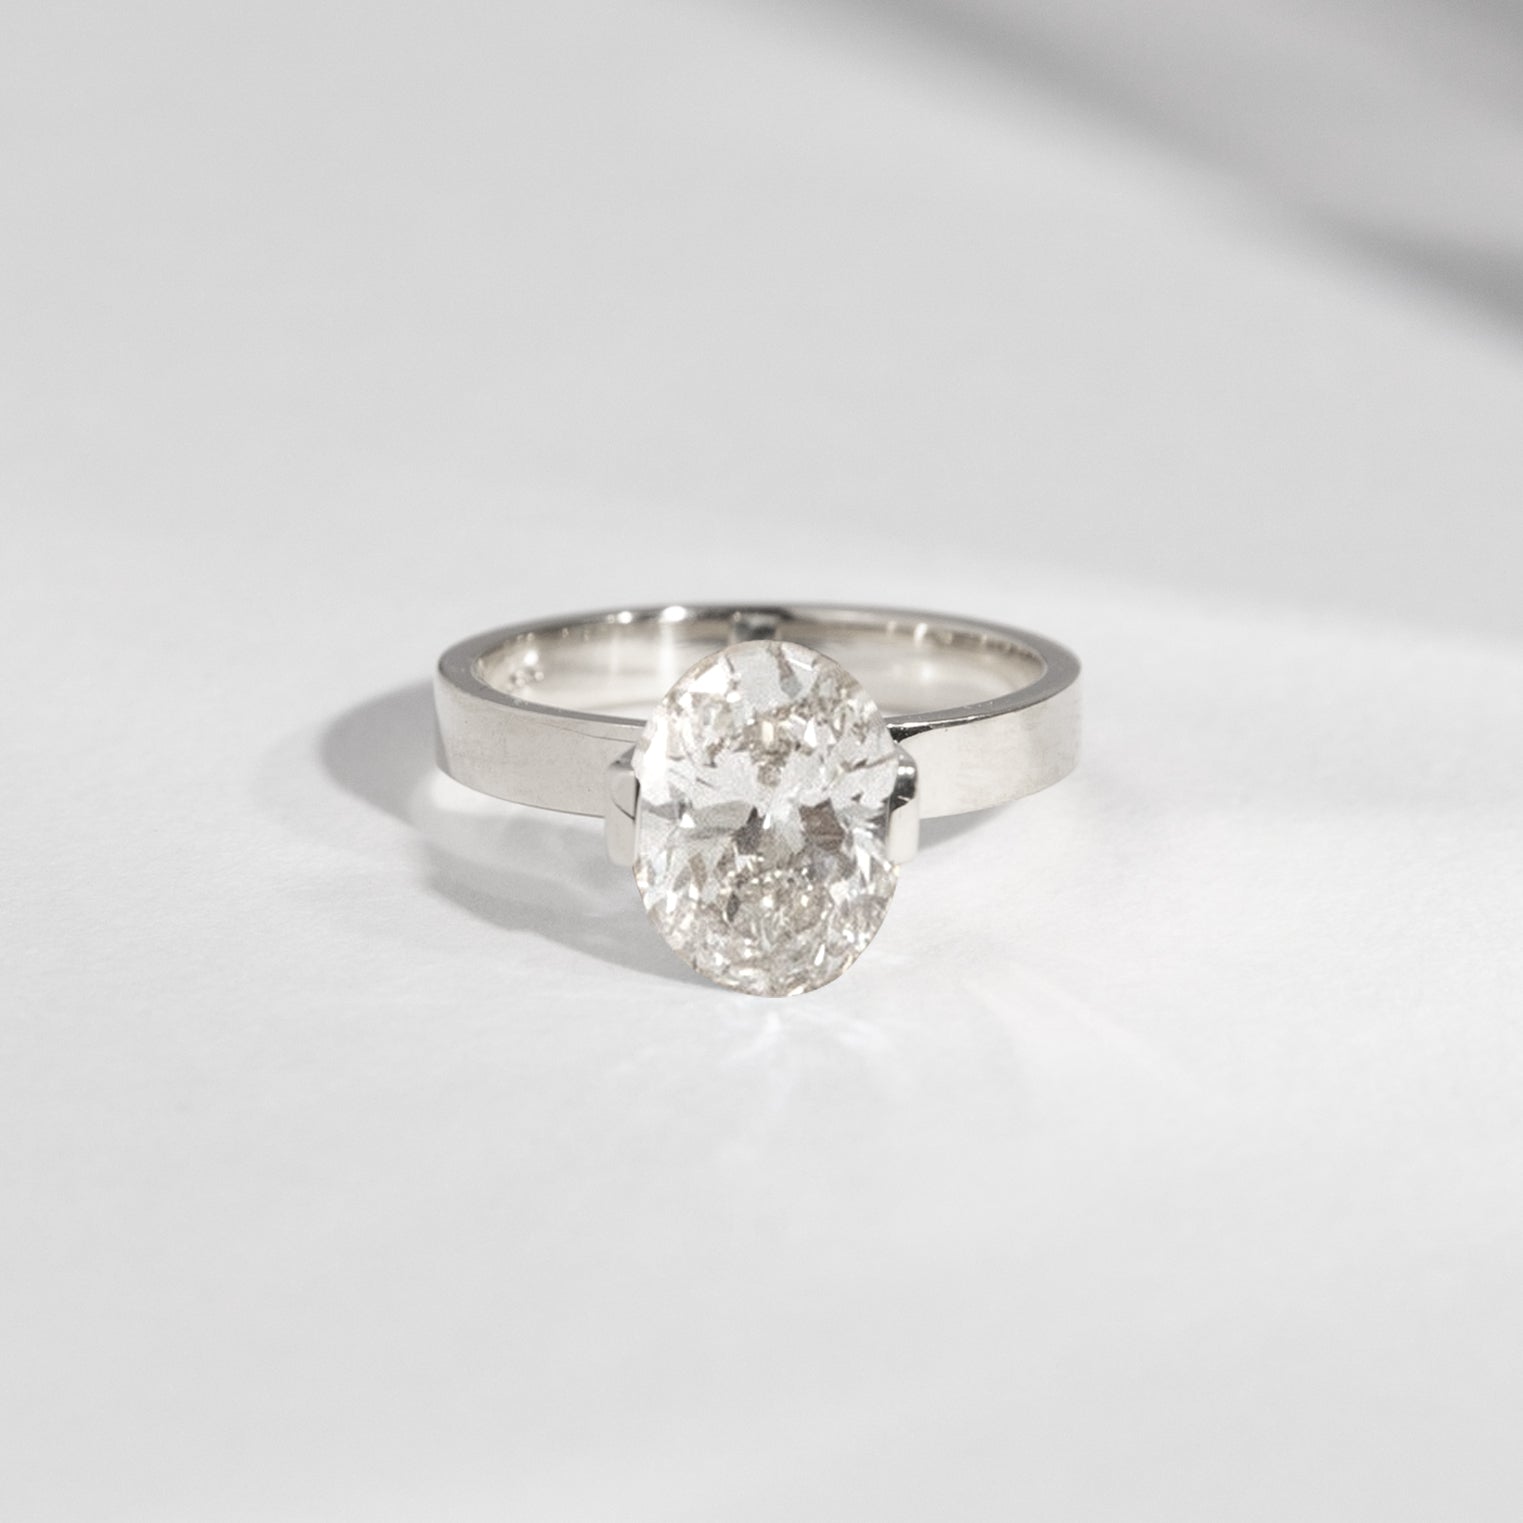 Silva Handmade Ring in 14k White Gold set with an oval brilliant cut lab-grown diamond By SHW Fine Jewelry NYC